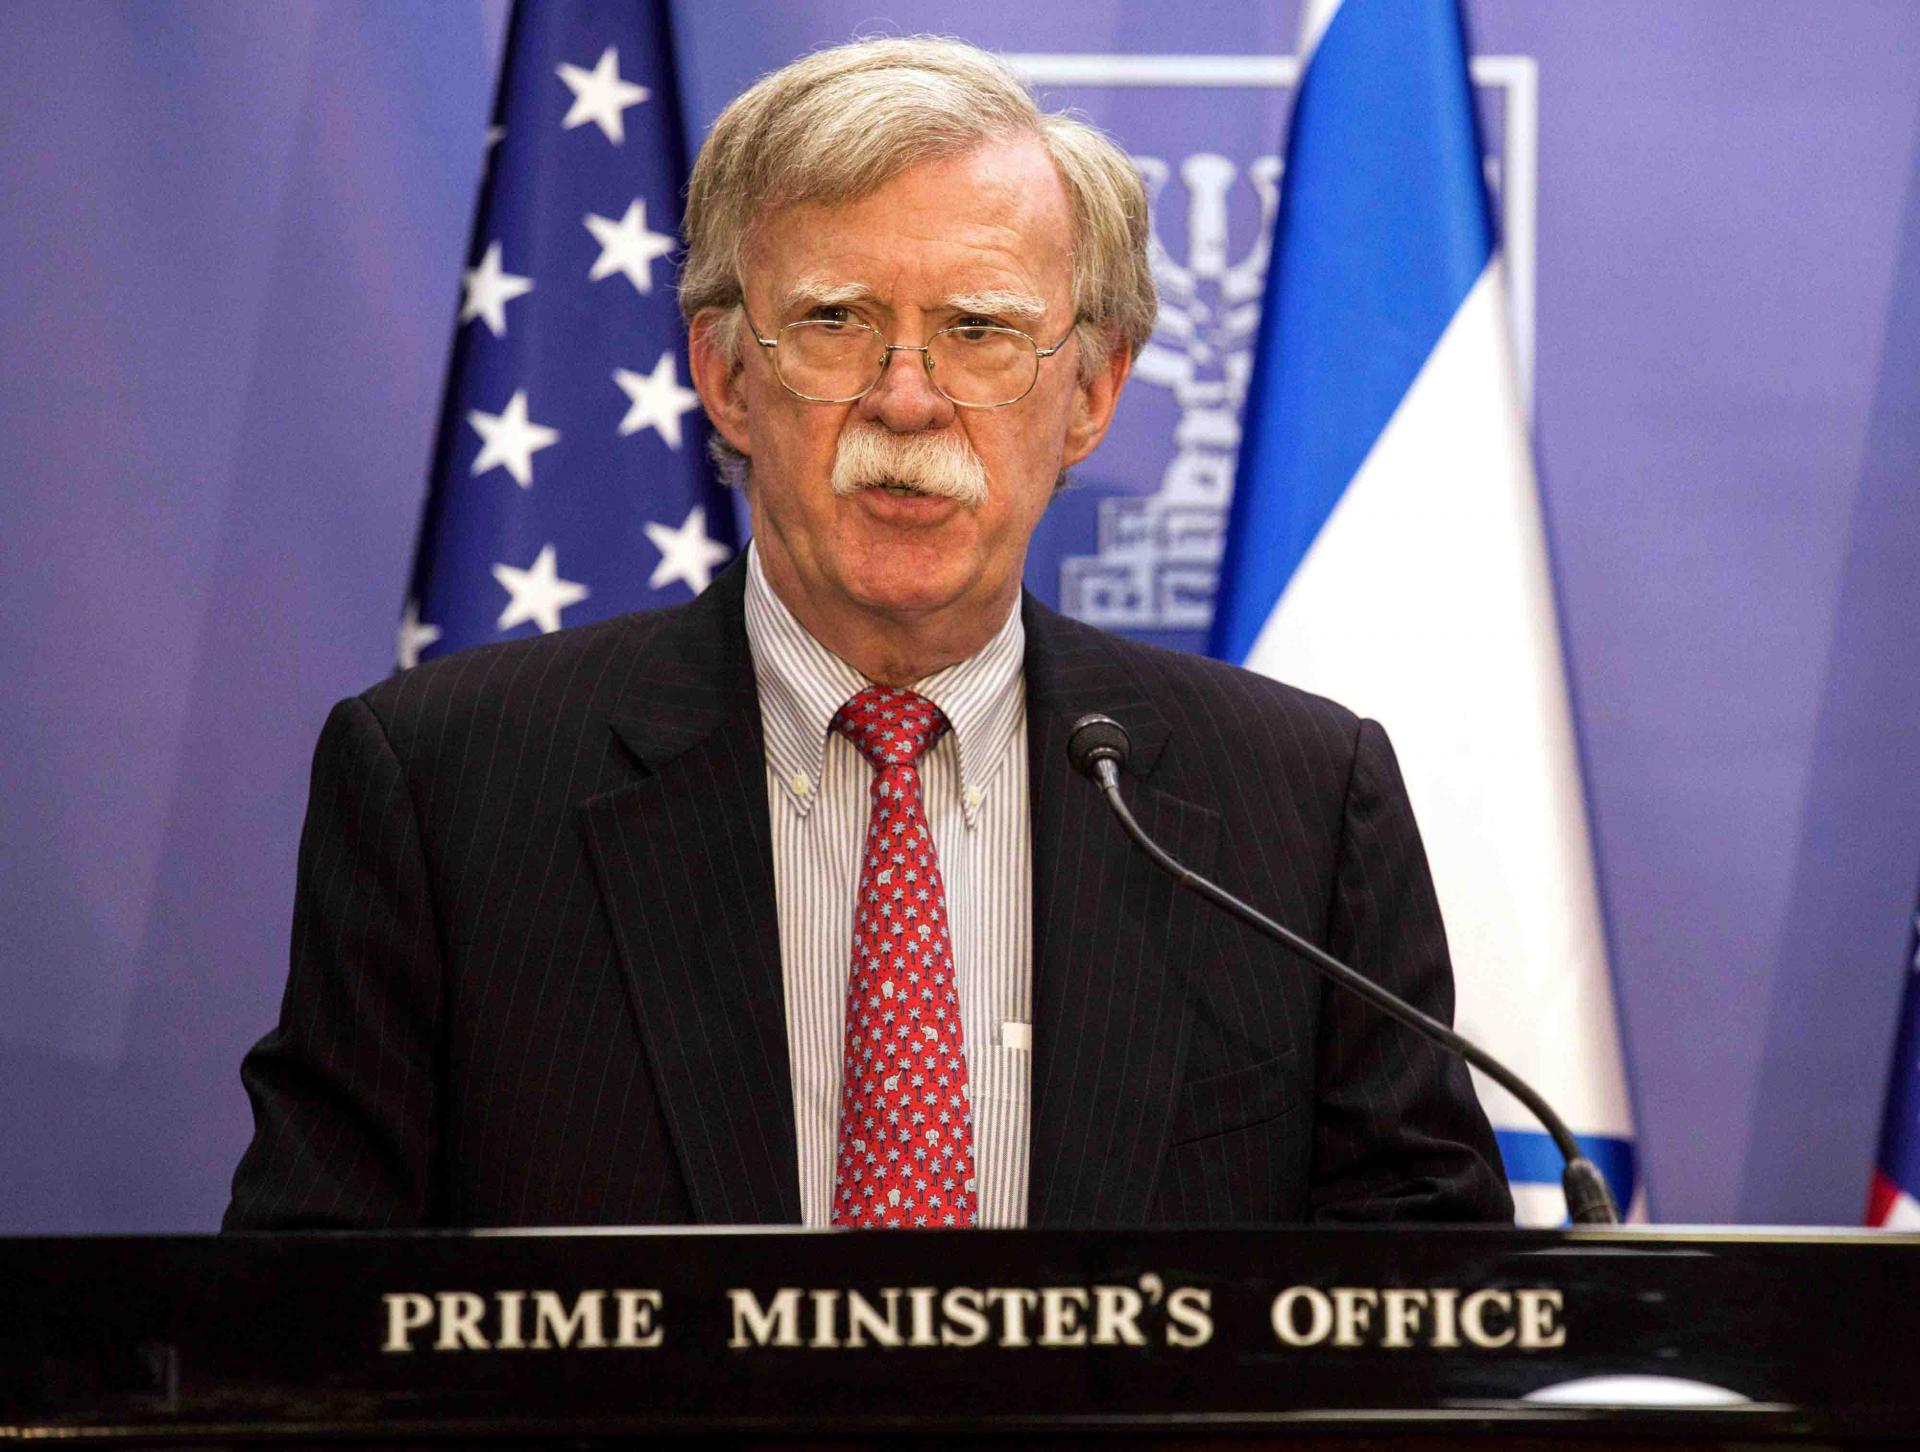 "Iran can never have nuclear weapons, not against the USA and not against the world," said Bolton